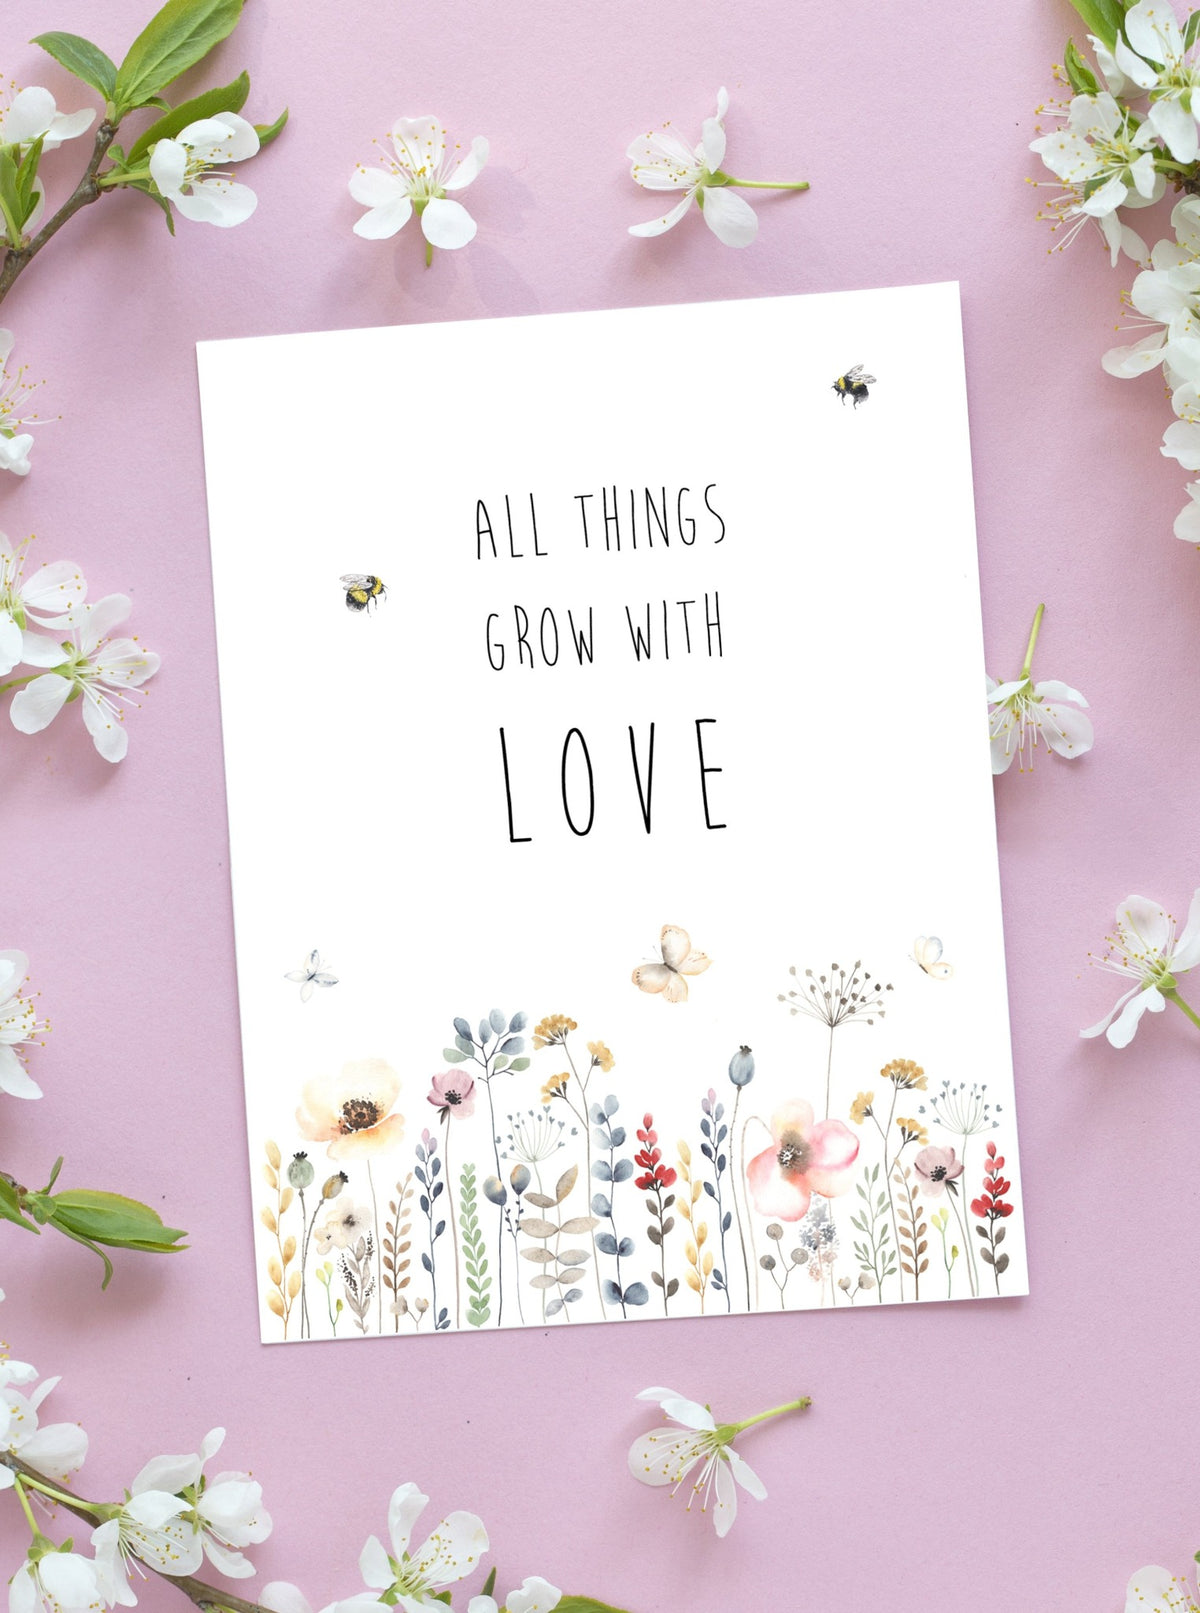 All Things Grow With Love Spring Greeting Card Set,Gift for Friend,Easter Card,Floral Spring Card,Flower Card,Mother's Day Card Made in USA